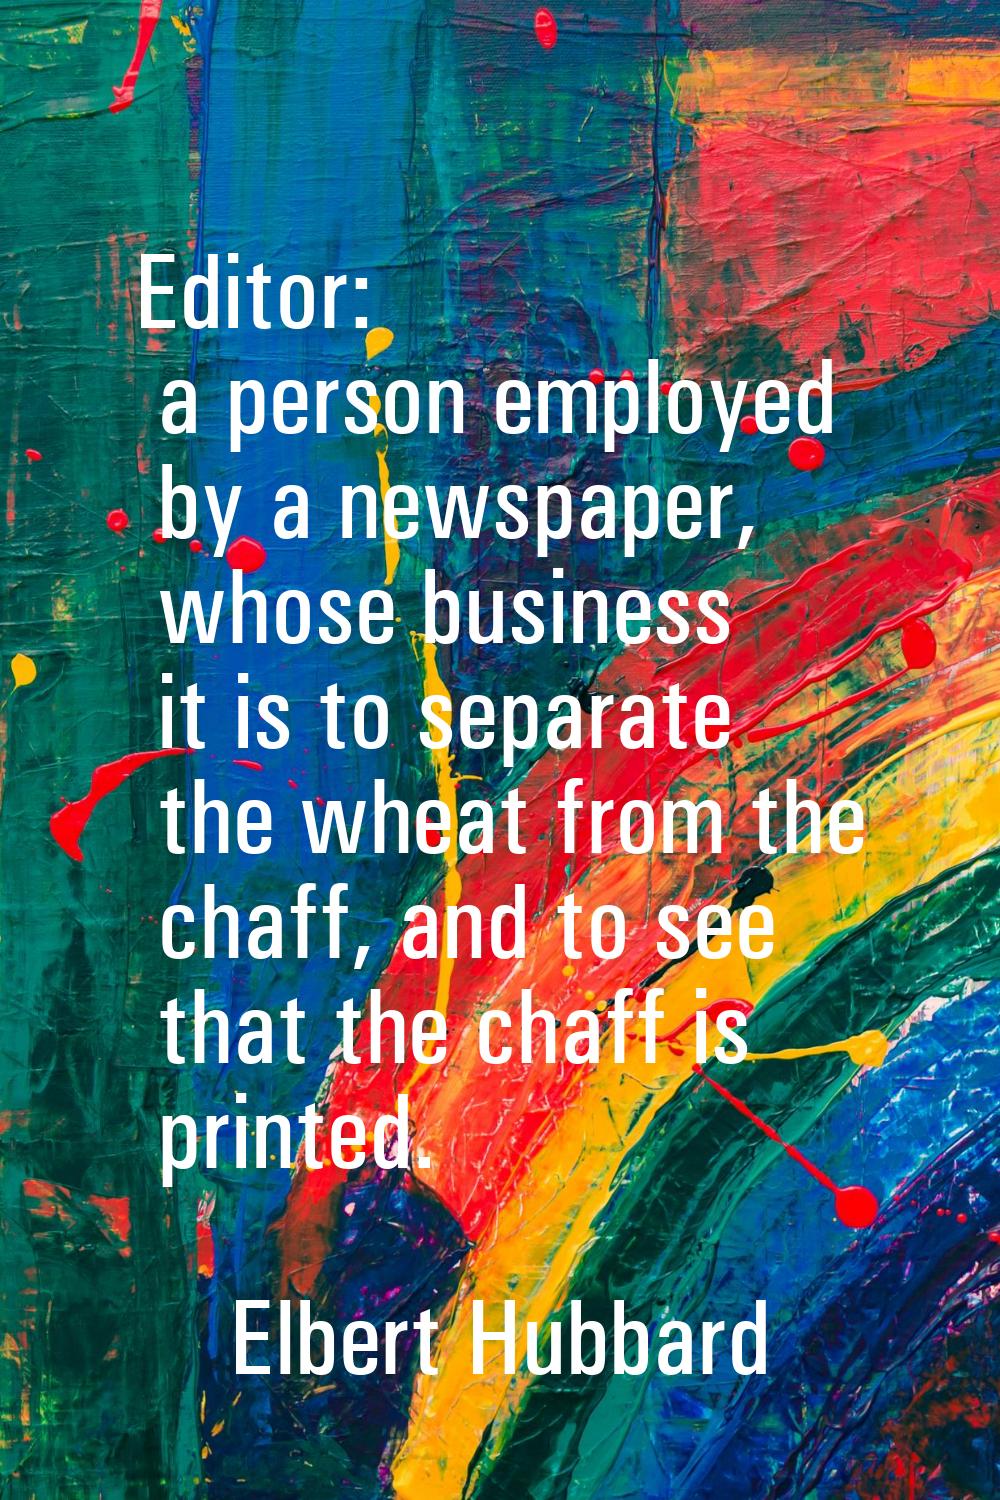 Editor: a person employed by a newspaper, whose business it is to separate the wheat from the chaff